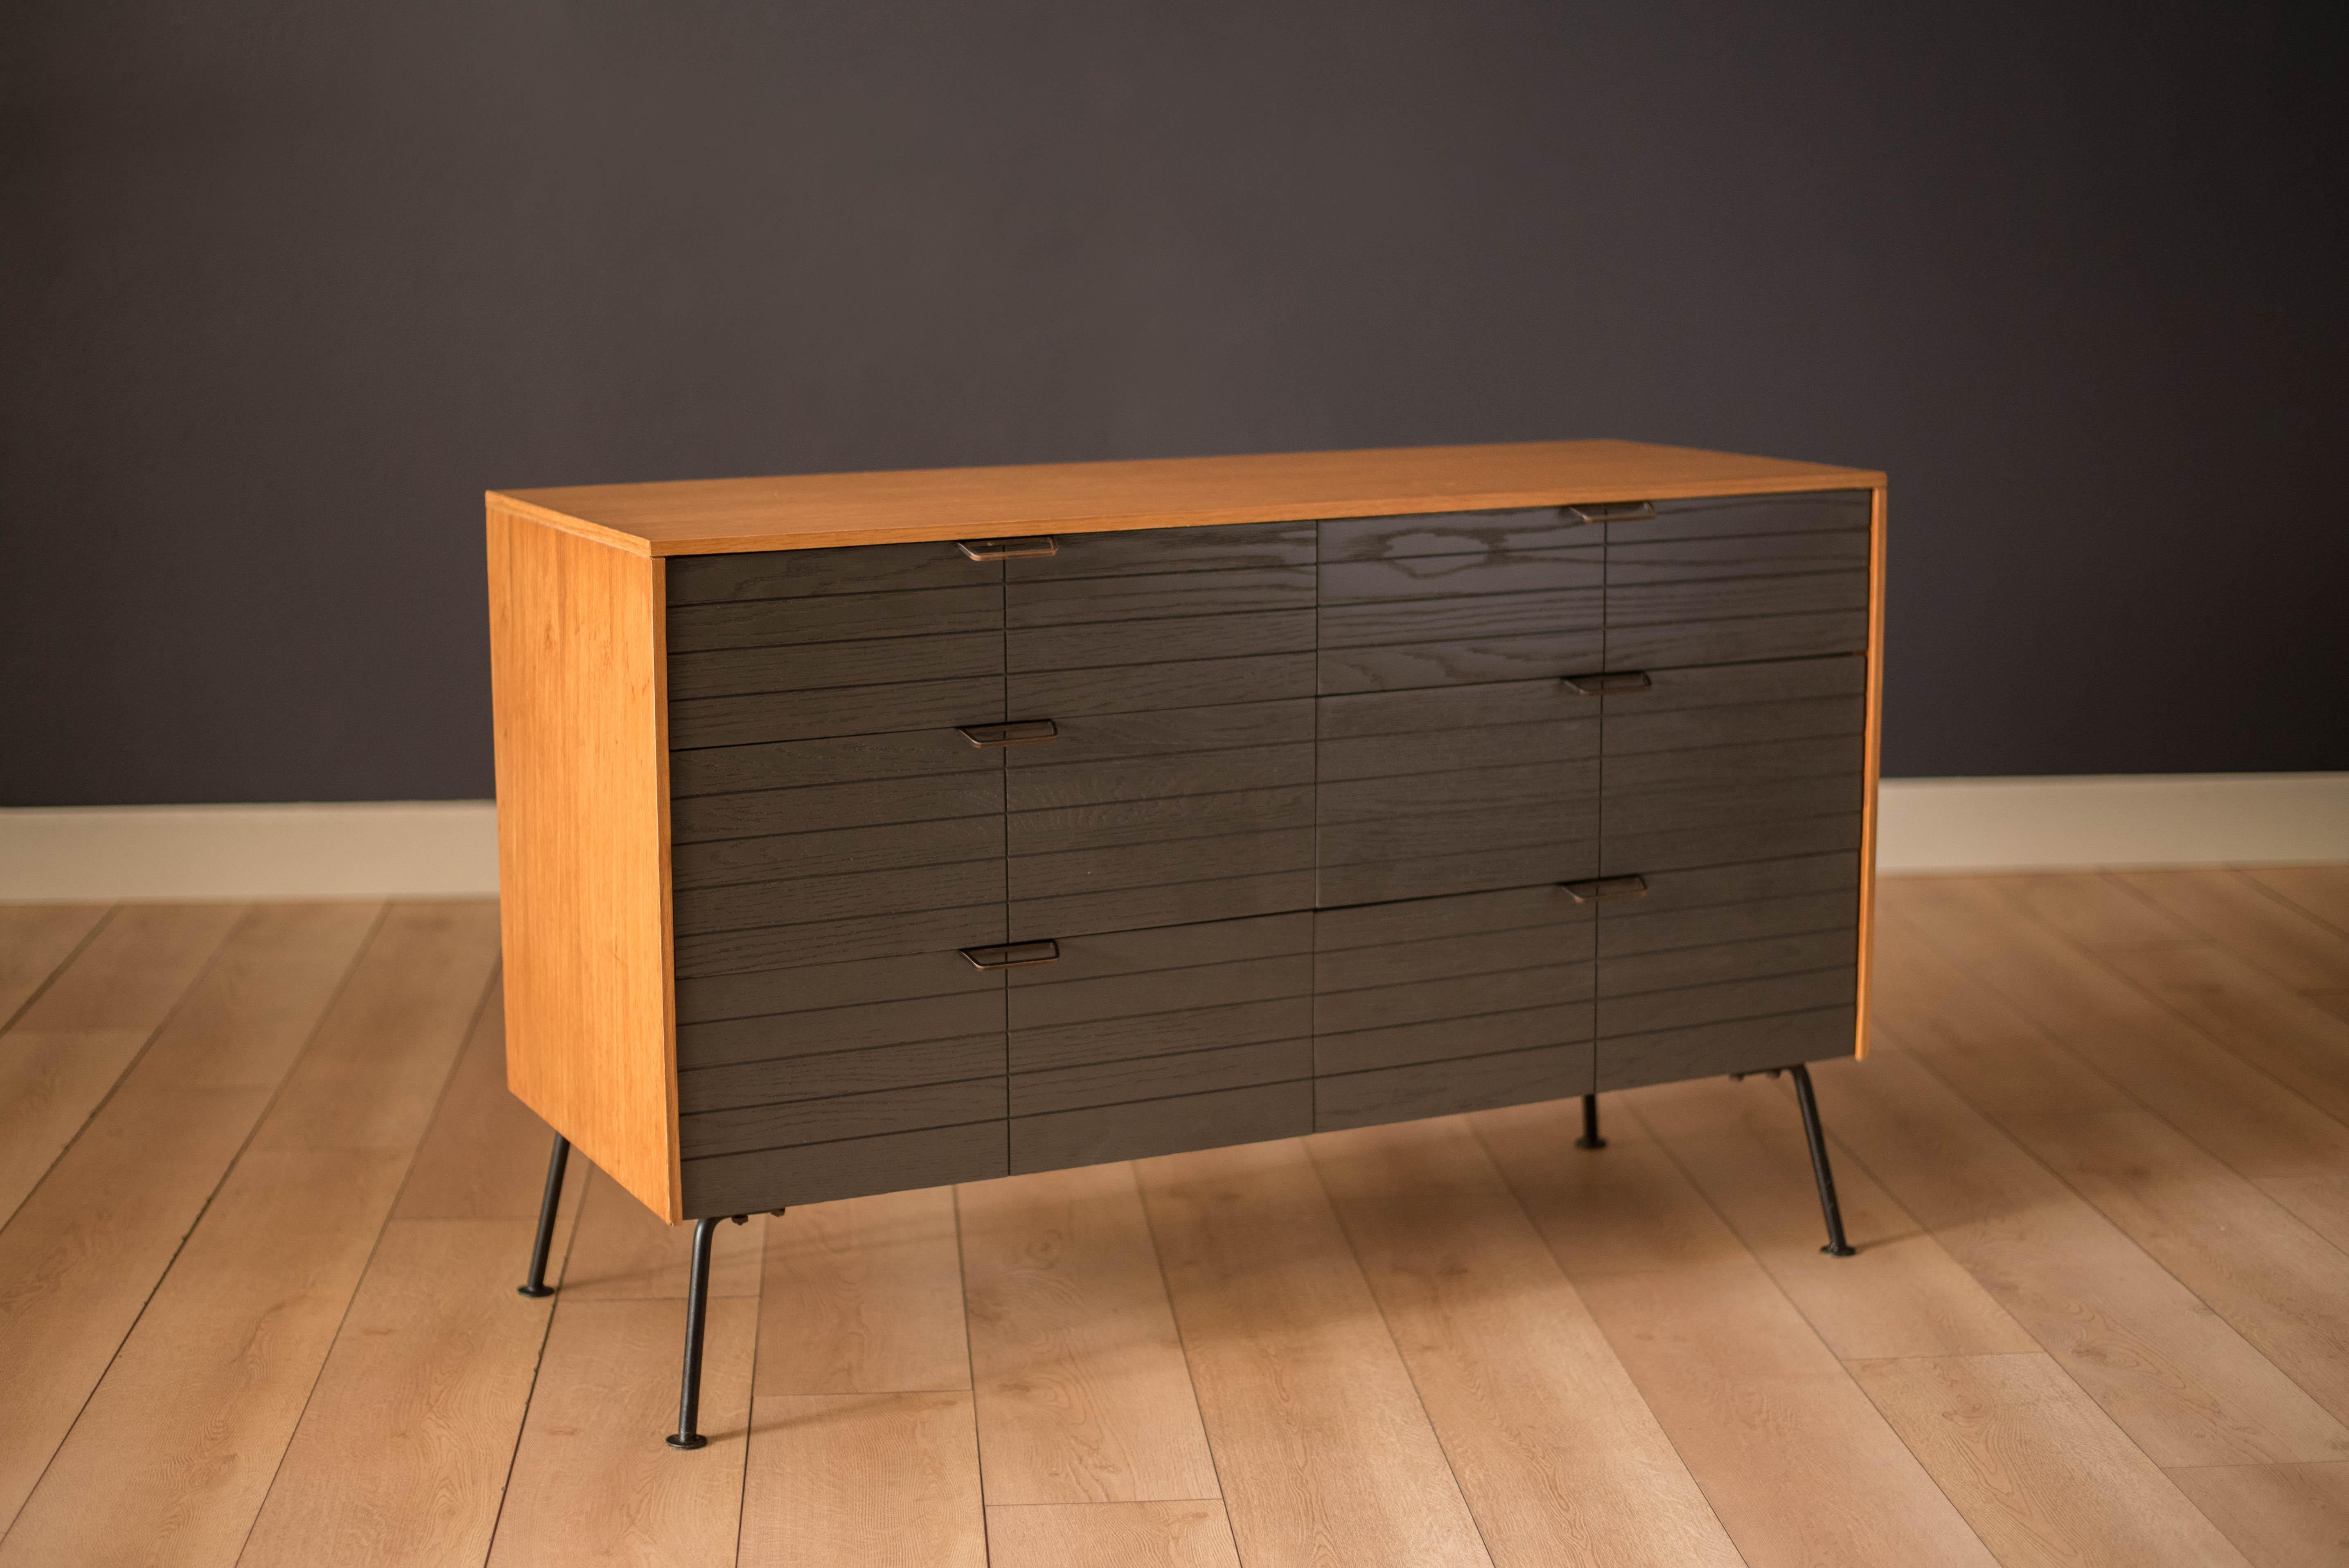 Vintage double dresser in natural white oak designed by Raymond Loewy for Mengel Furniture Co., circa 1950s. Features a two-tone case accessorized with signature metal hardware and iron legs. This piece includes six dovetailed drawers in a bold gray